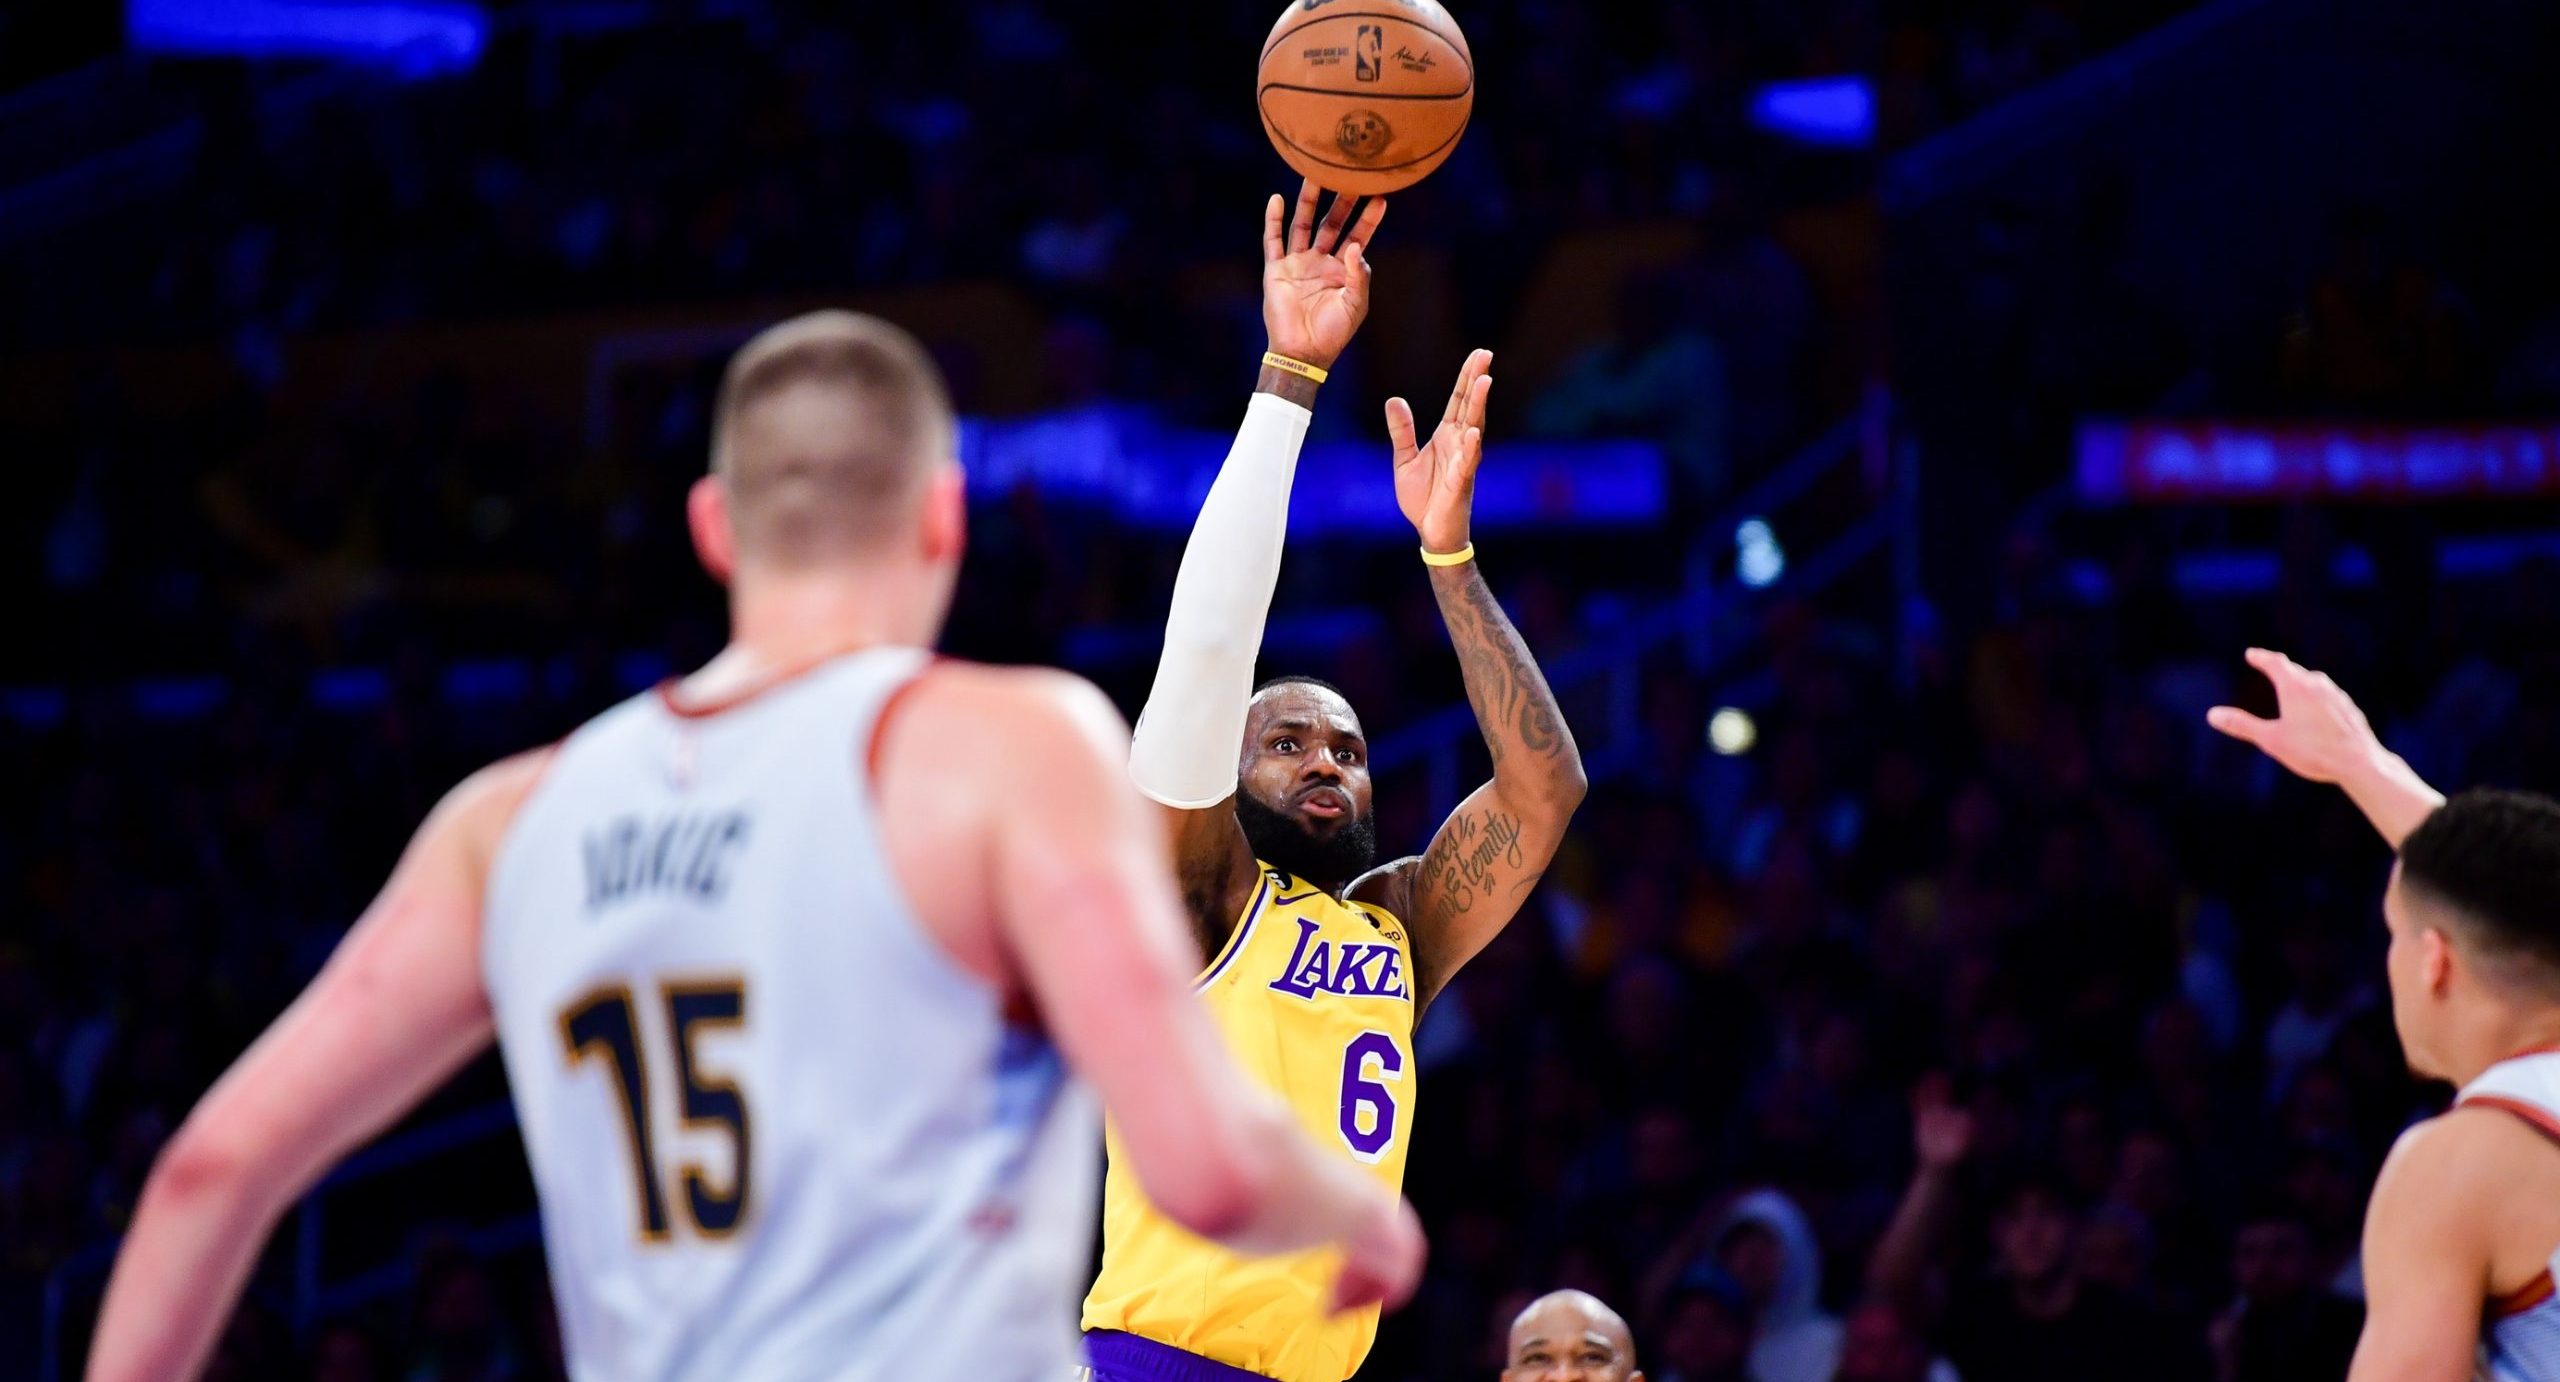 May 22, 2023; Los Angeles, California, USA; Los Angeles Lakers forward LeBron James (6) shoots the ball against the Denver Nuggets during the third quarter in game four of the Western Conference Finals for the 2023 NBA playoffs at Crypto.com Arena. Mandatory Credit: Gary A. Vasquez-USA TODAY Sports